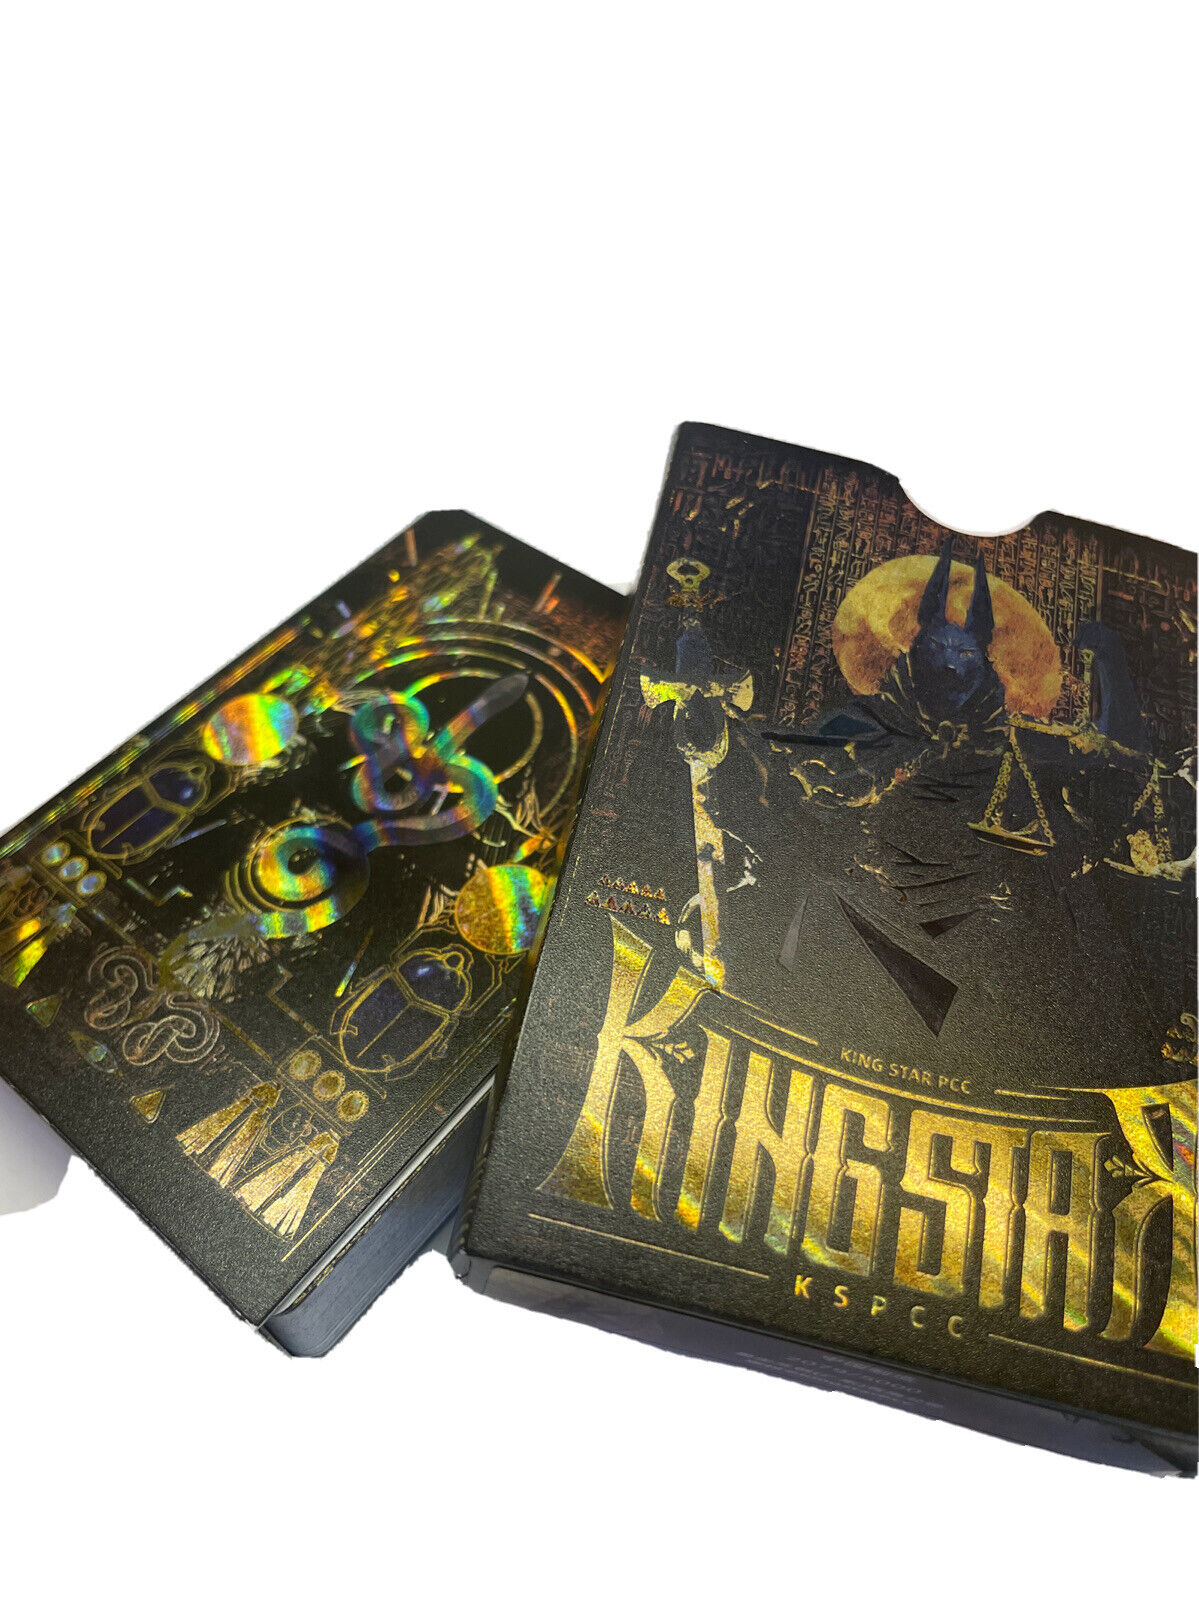 KingStar Judgement 5000 Manas Mystery Deck Playing Cards Sealed